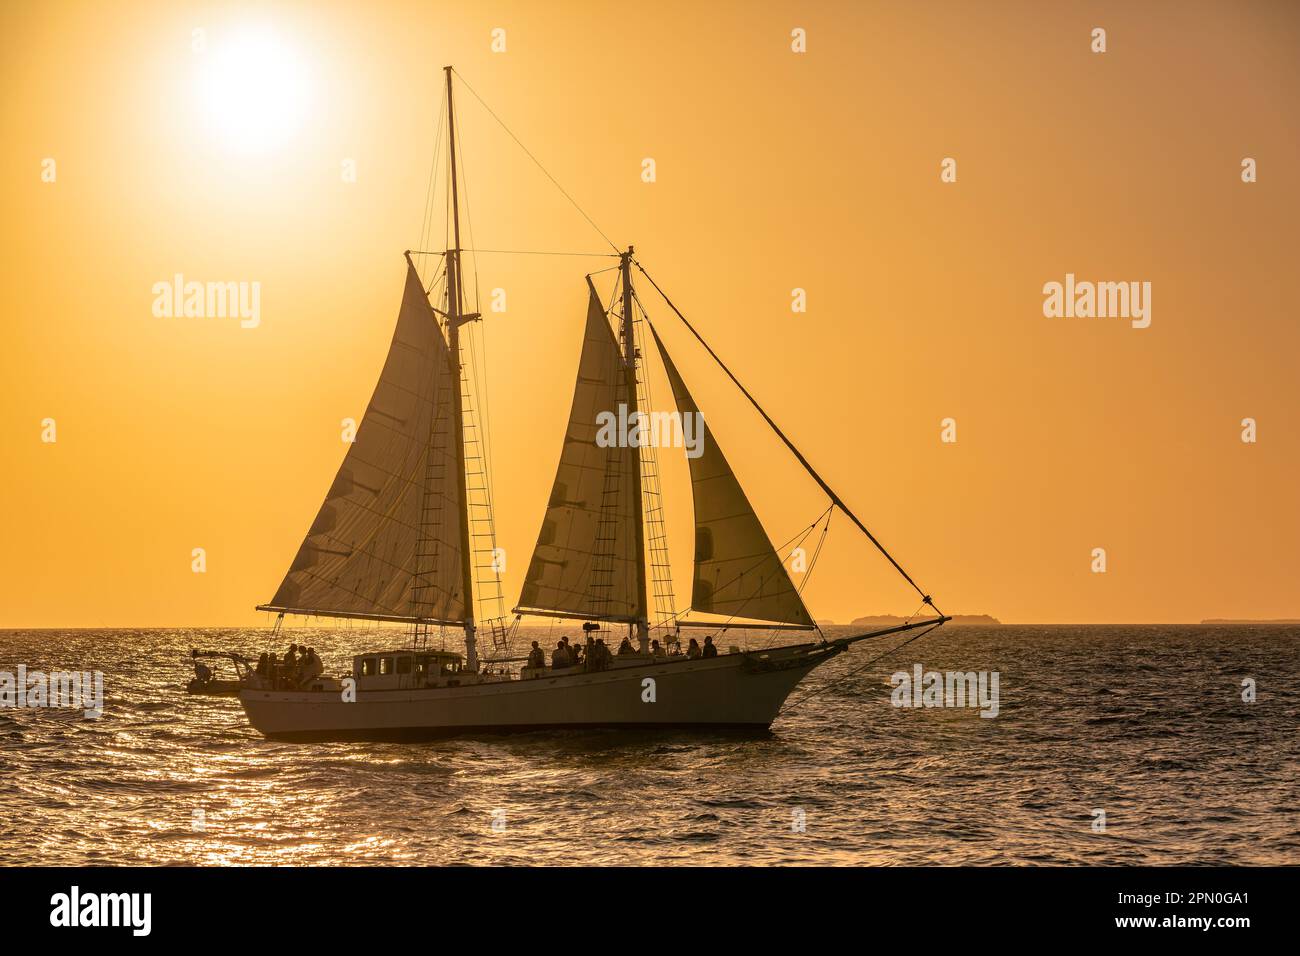 Sailboat at sunset in Key West, Florida. Stock Photo